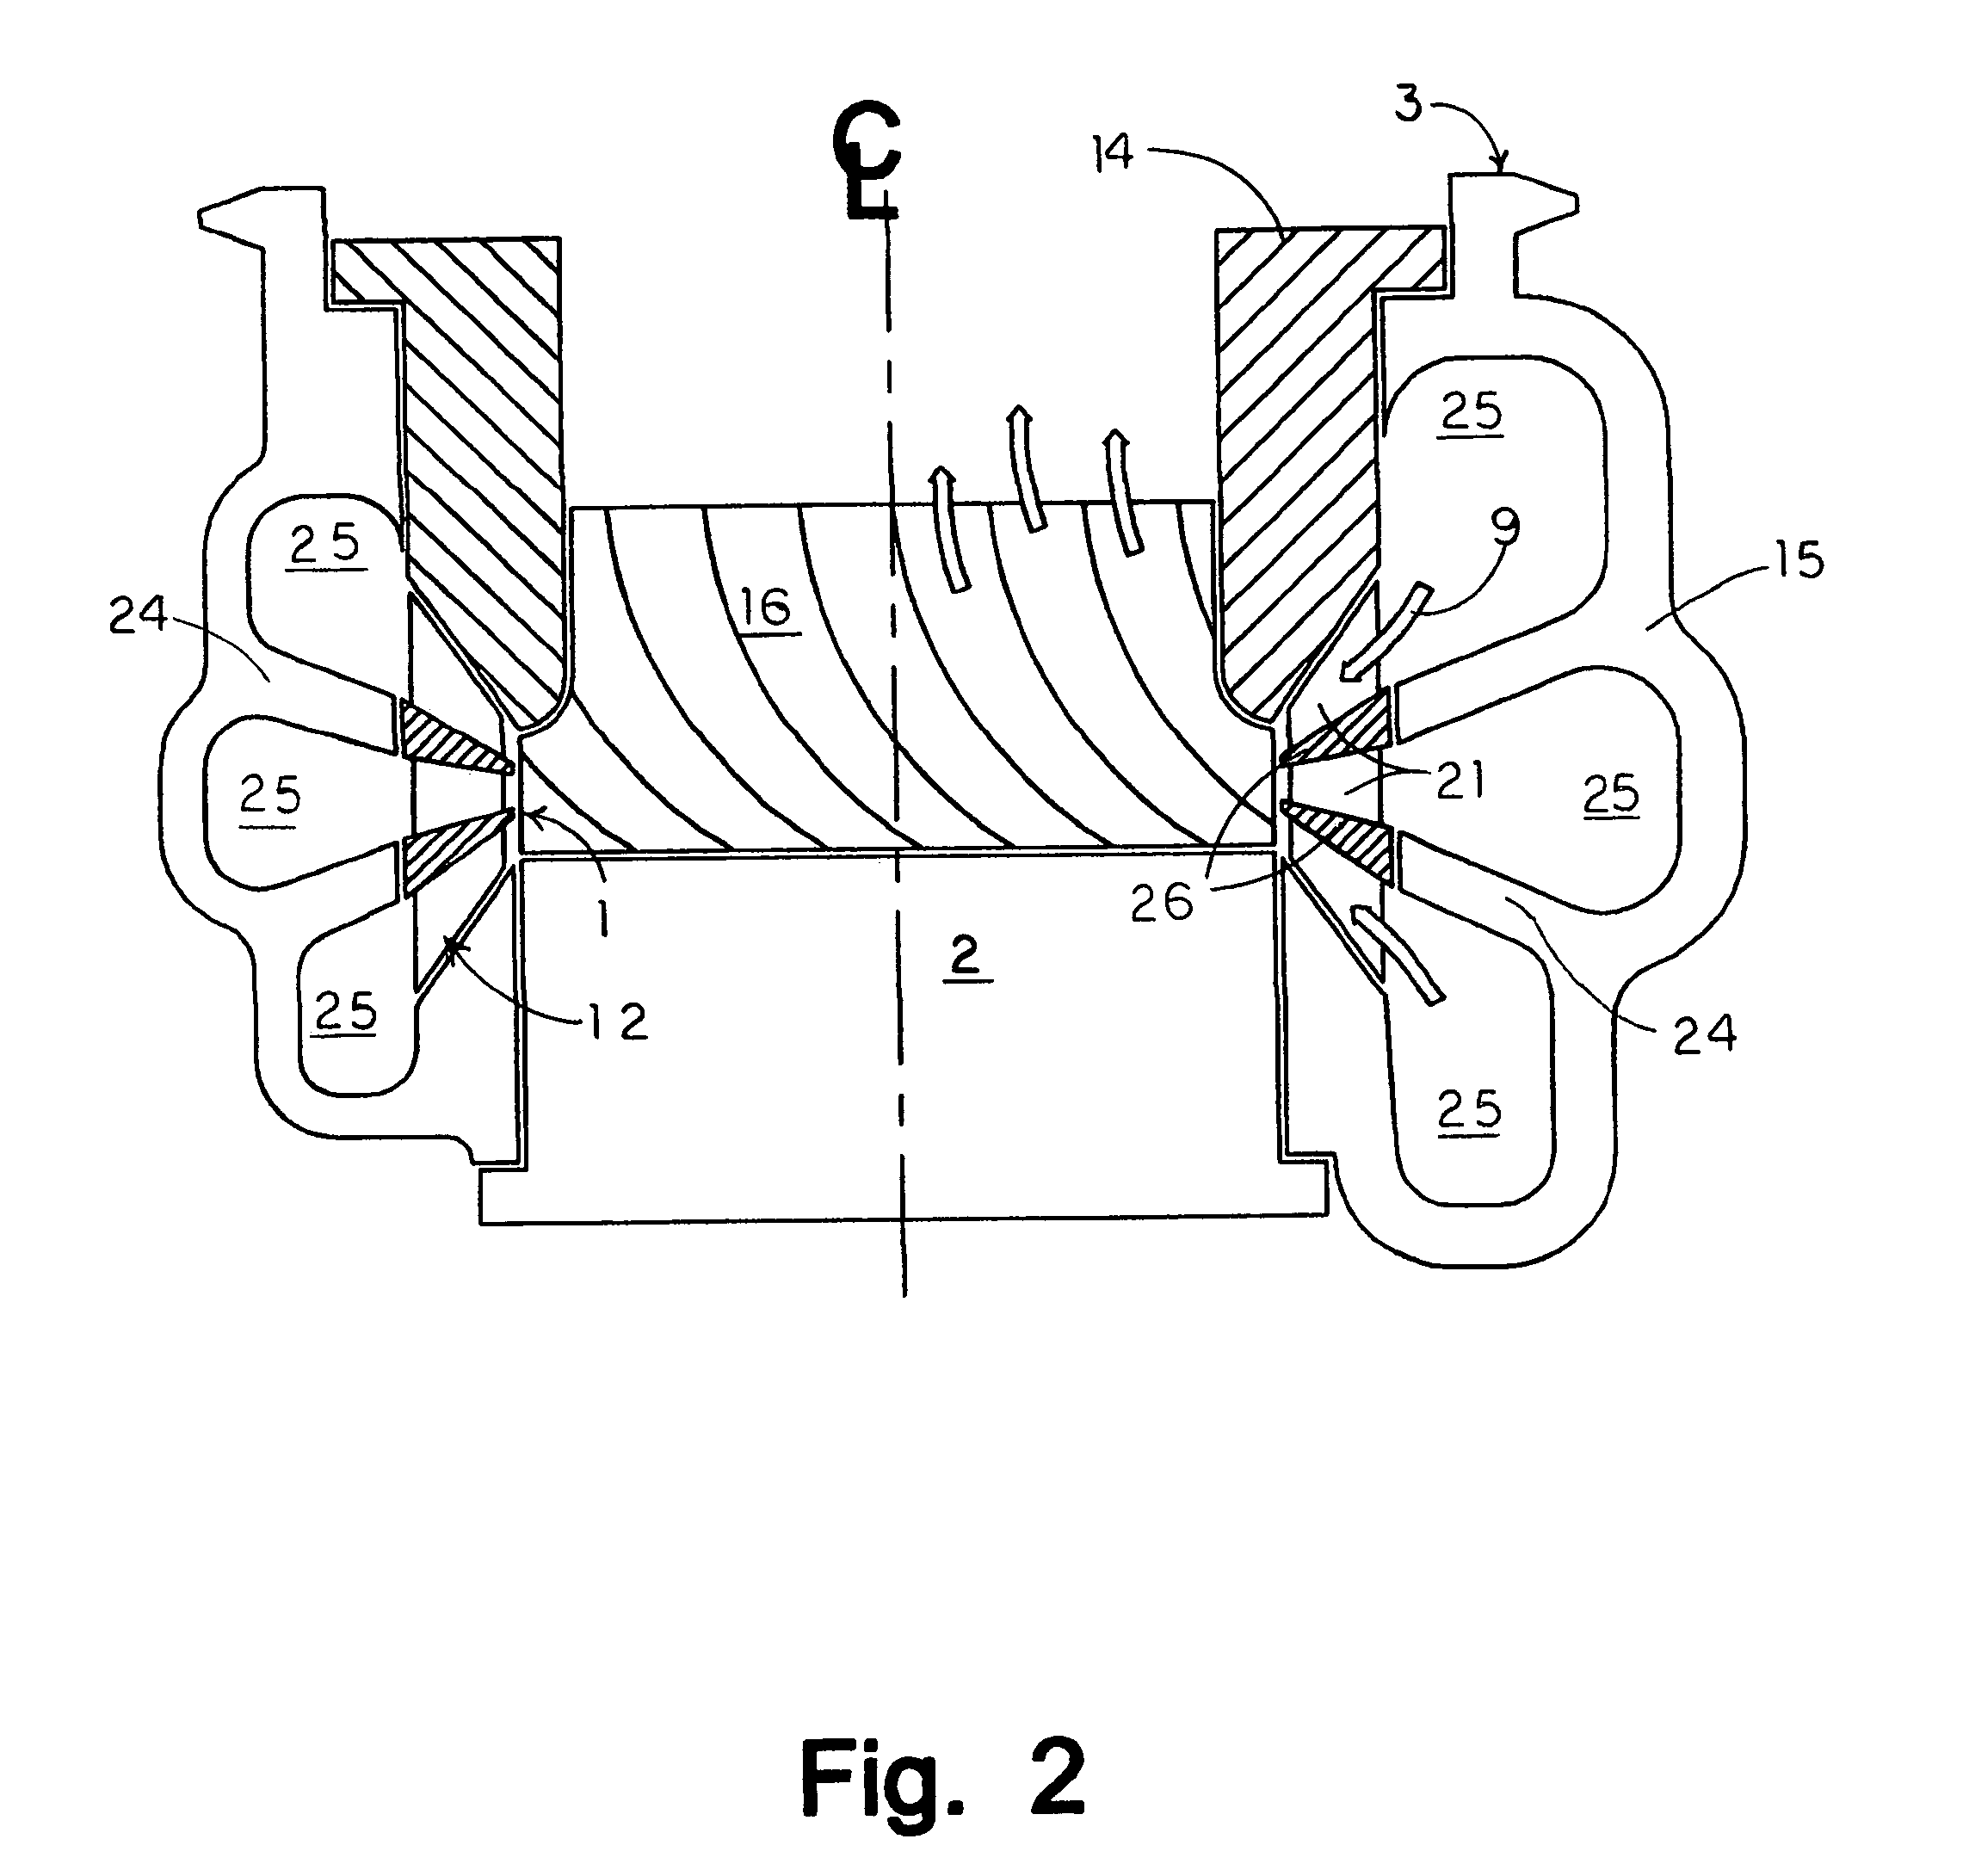 Turbine assemblies and related systems for use with turbochargers